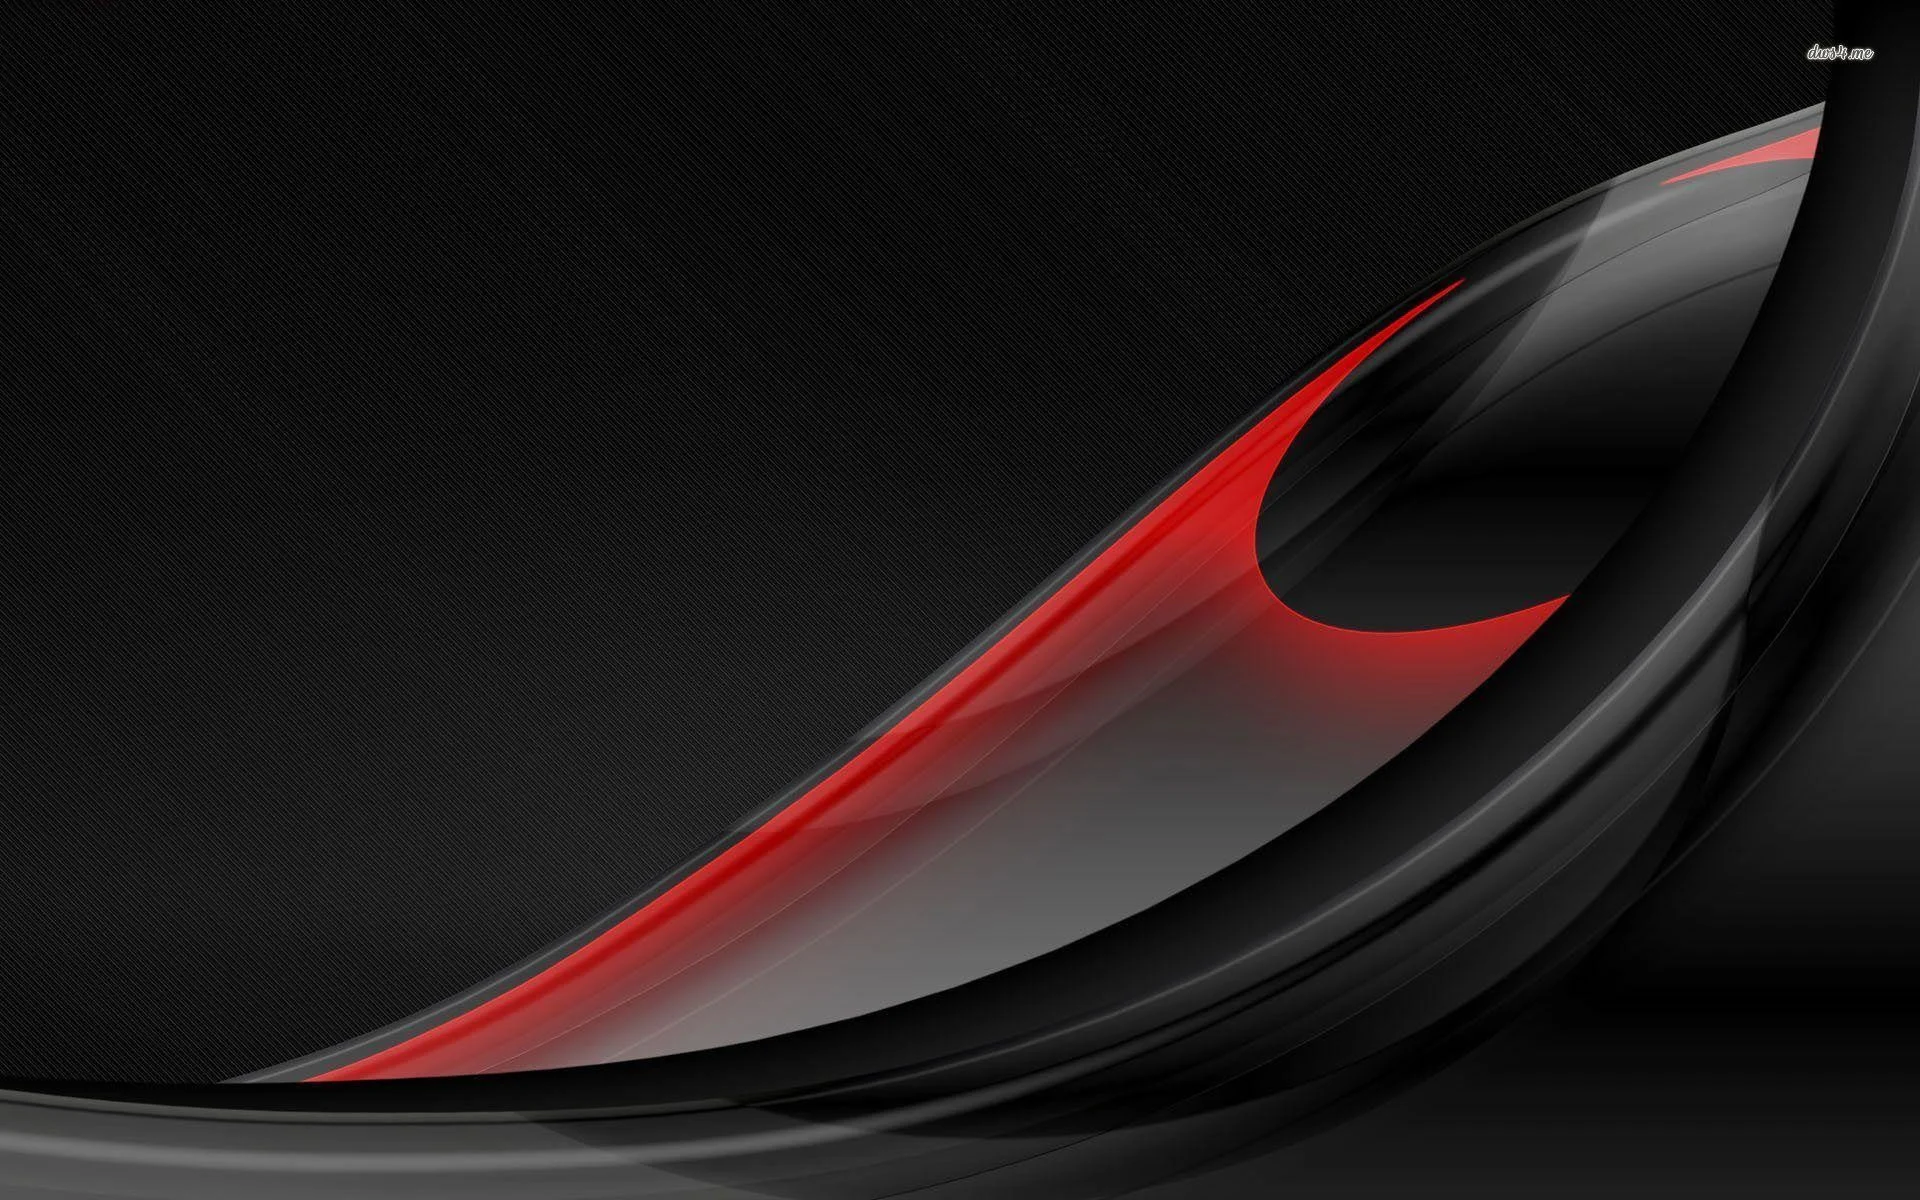 Black And White And Red Abstract Wallpaper Hd Cool 7 HD Wallpapers